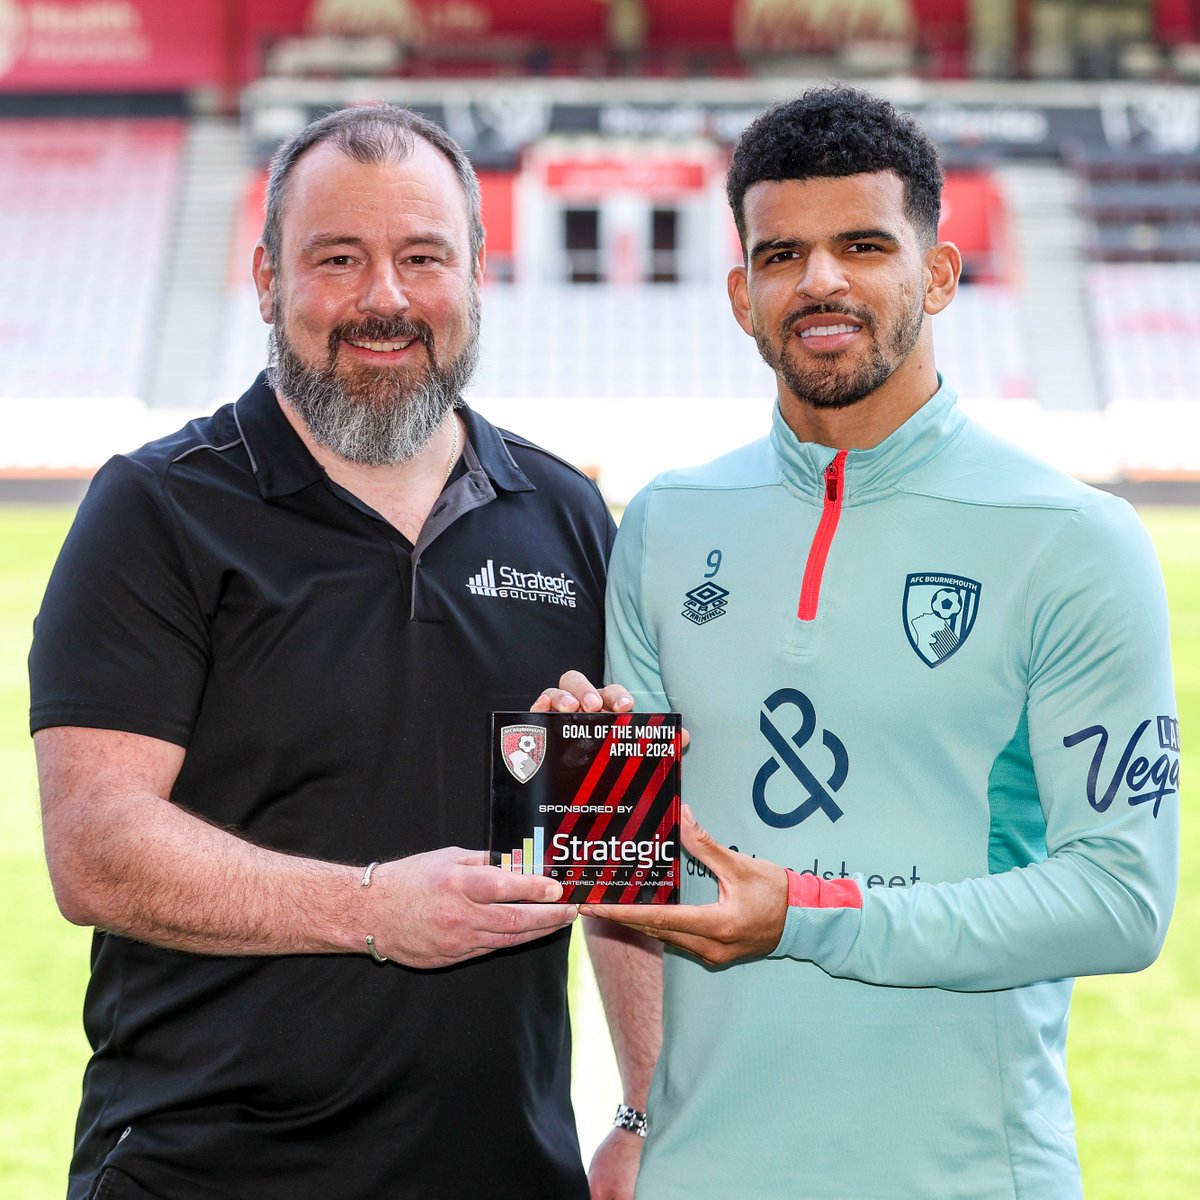 An absolute banger against Man United 🔥 @DomSolanke is the @StrategicSols Goal of the Month award winner for April 🏆